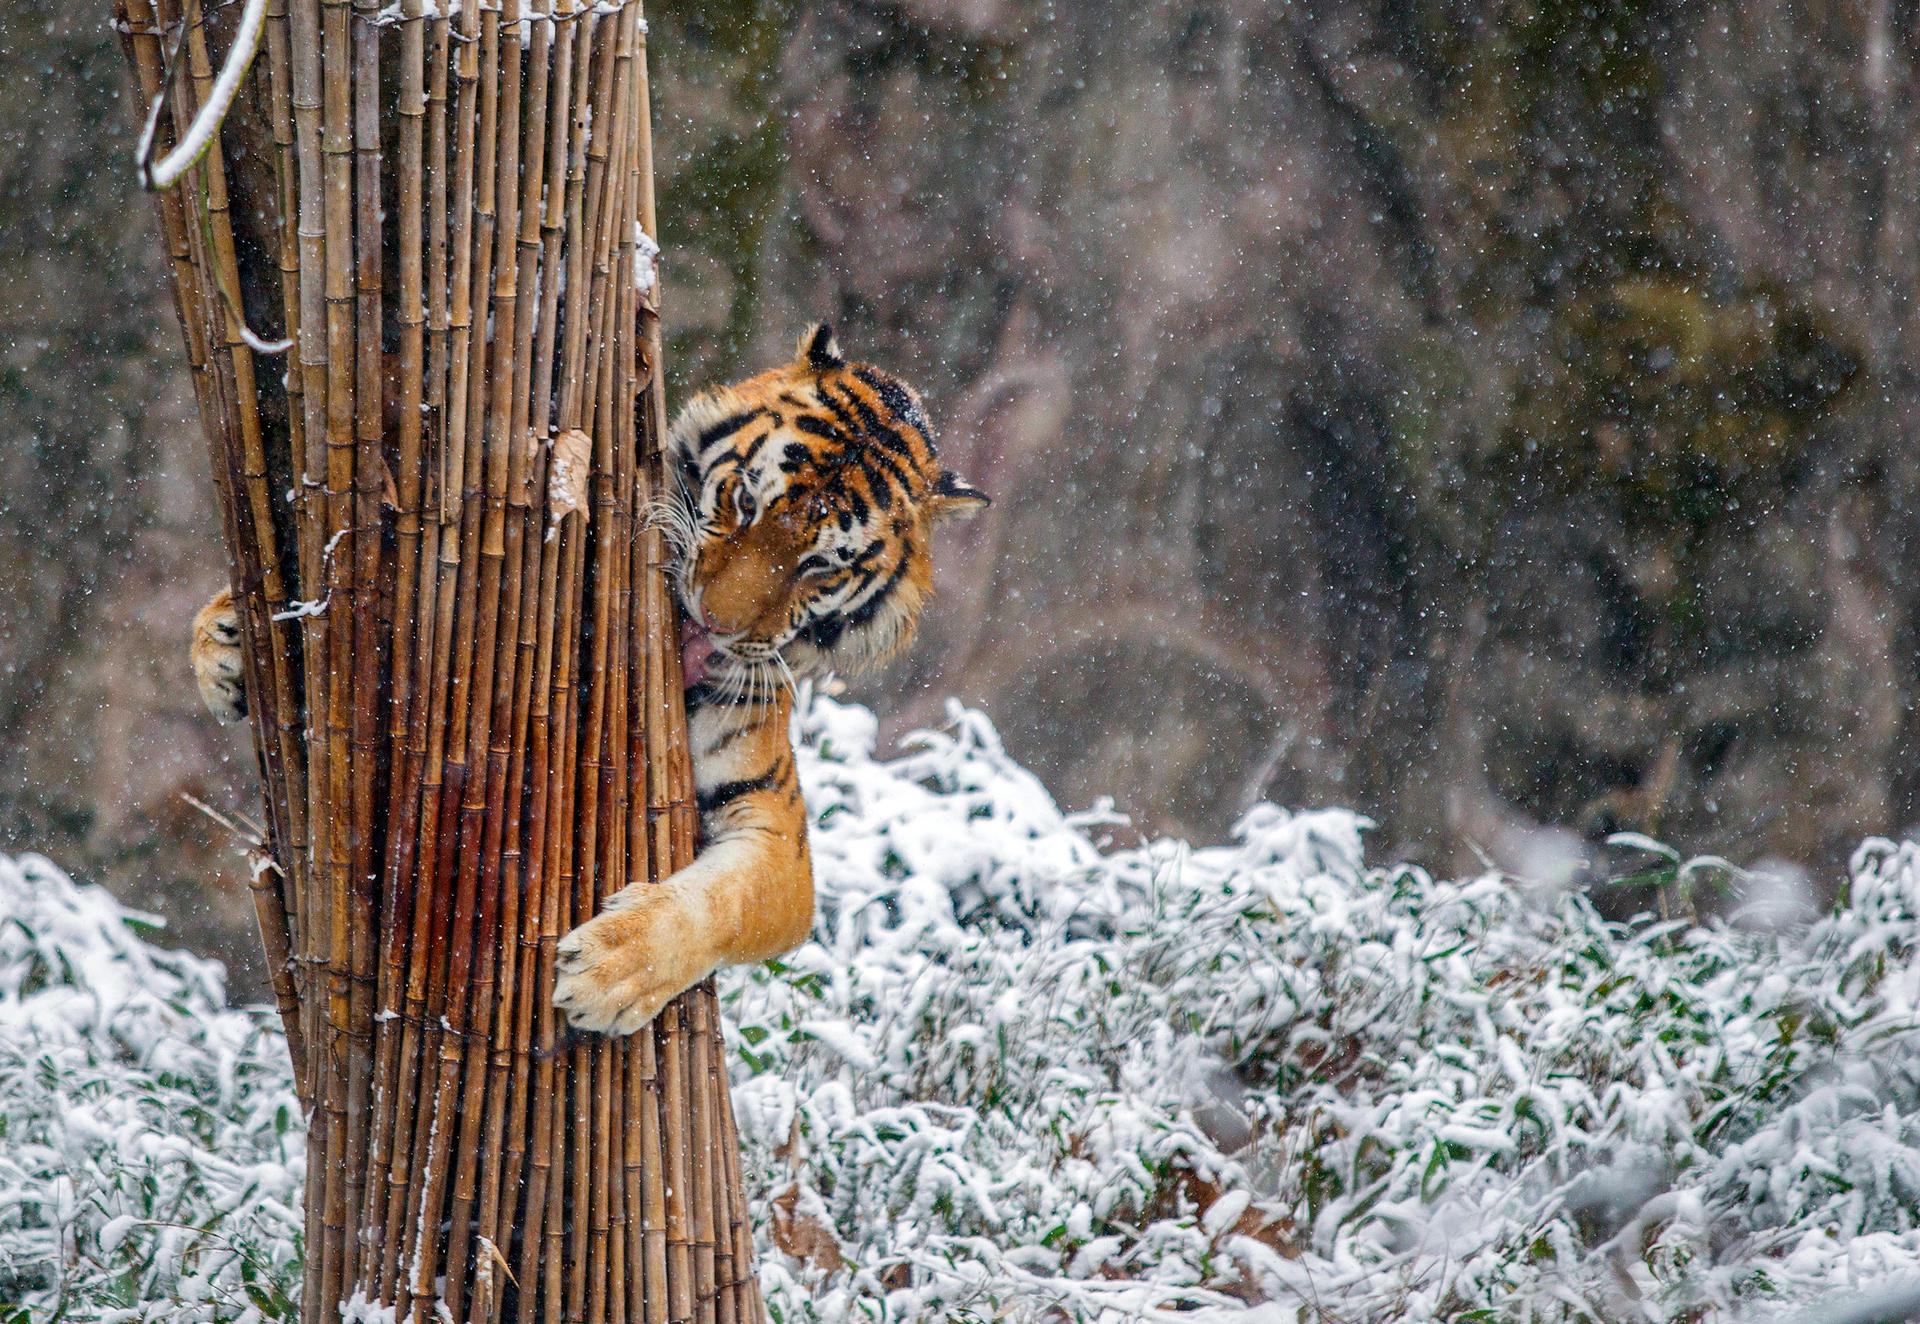 Tiger in China